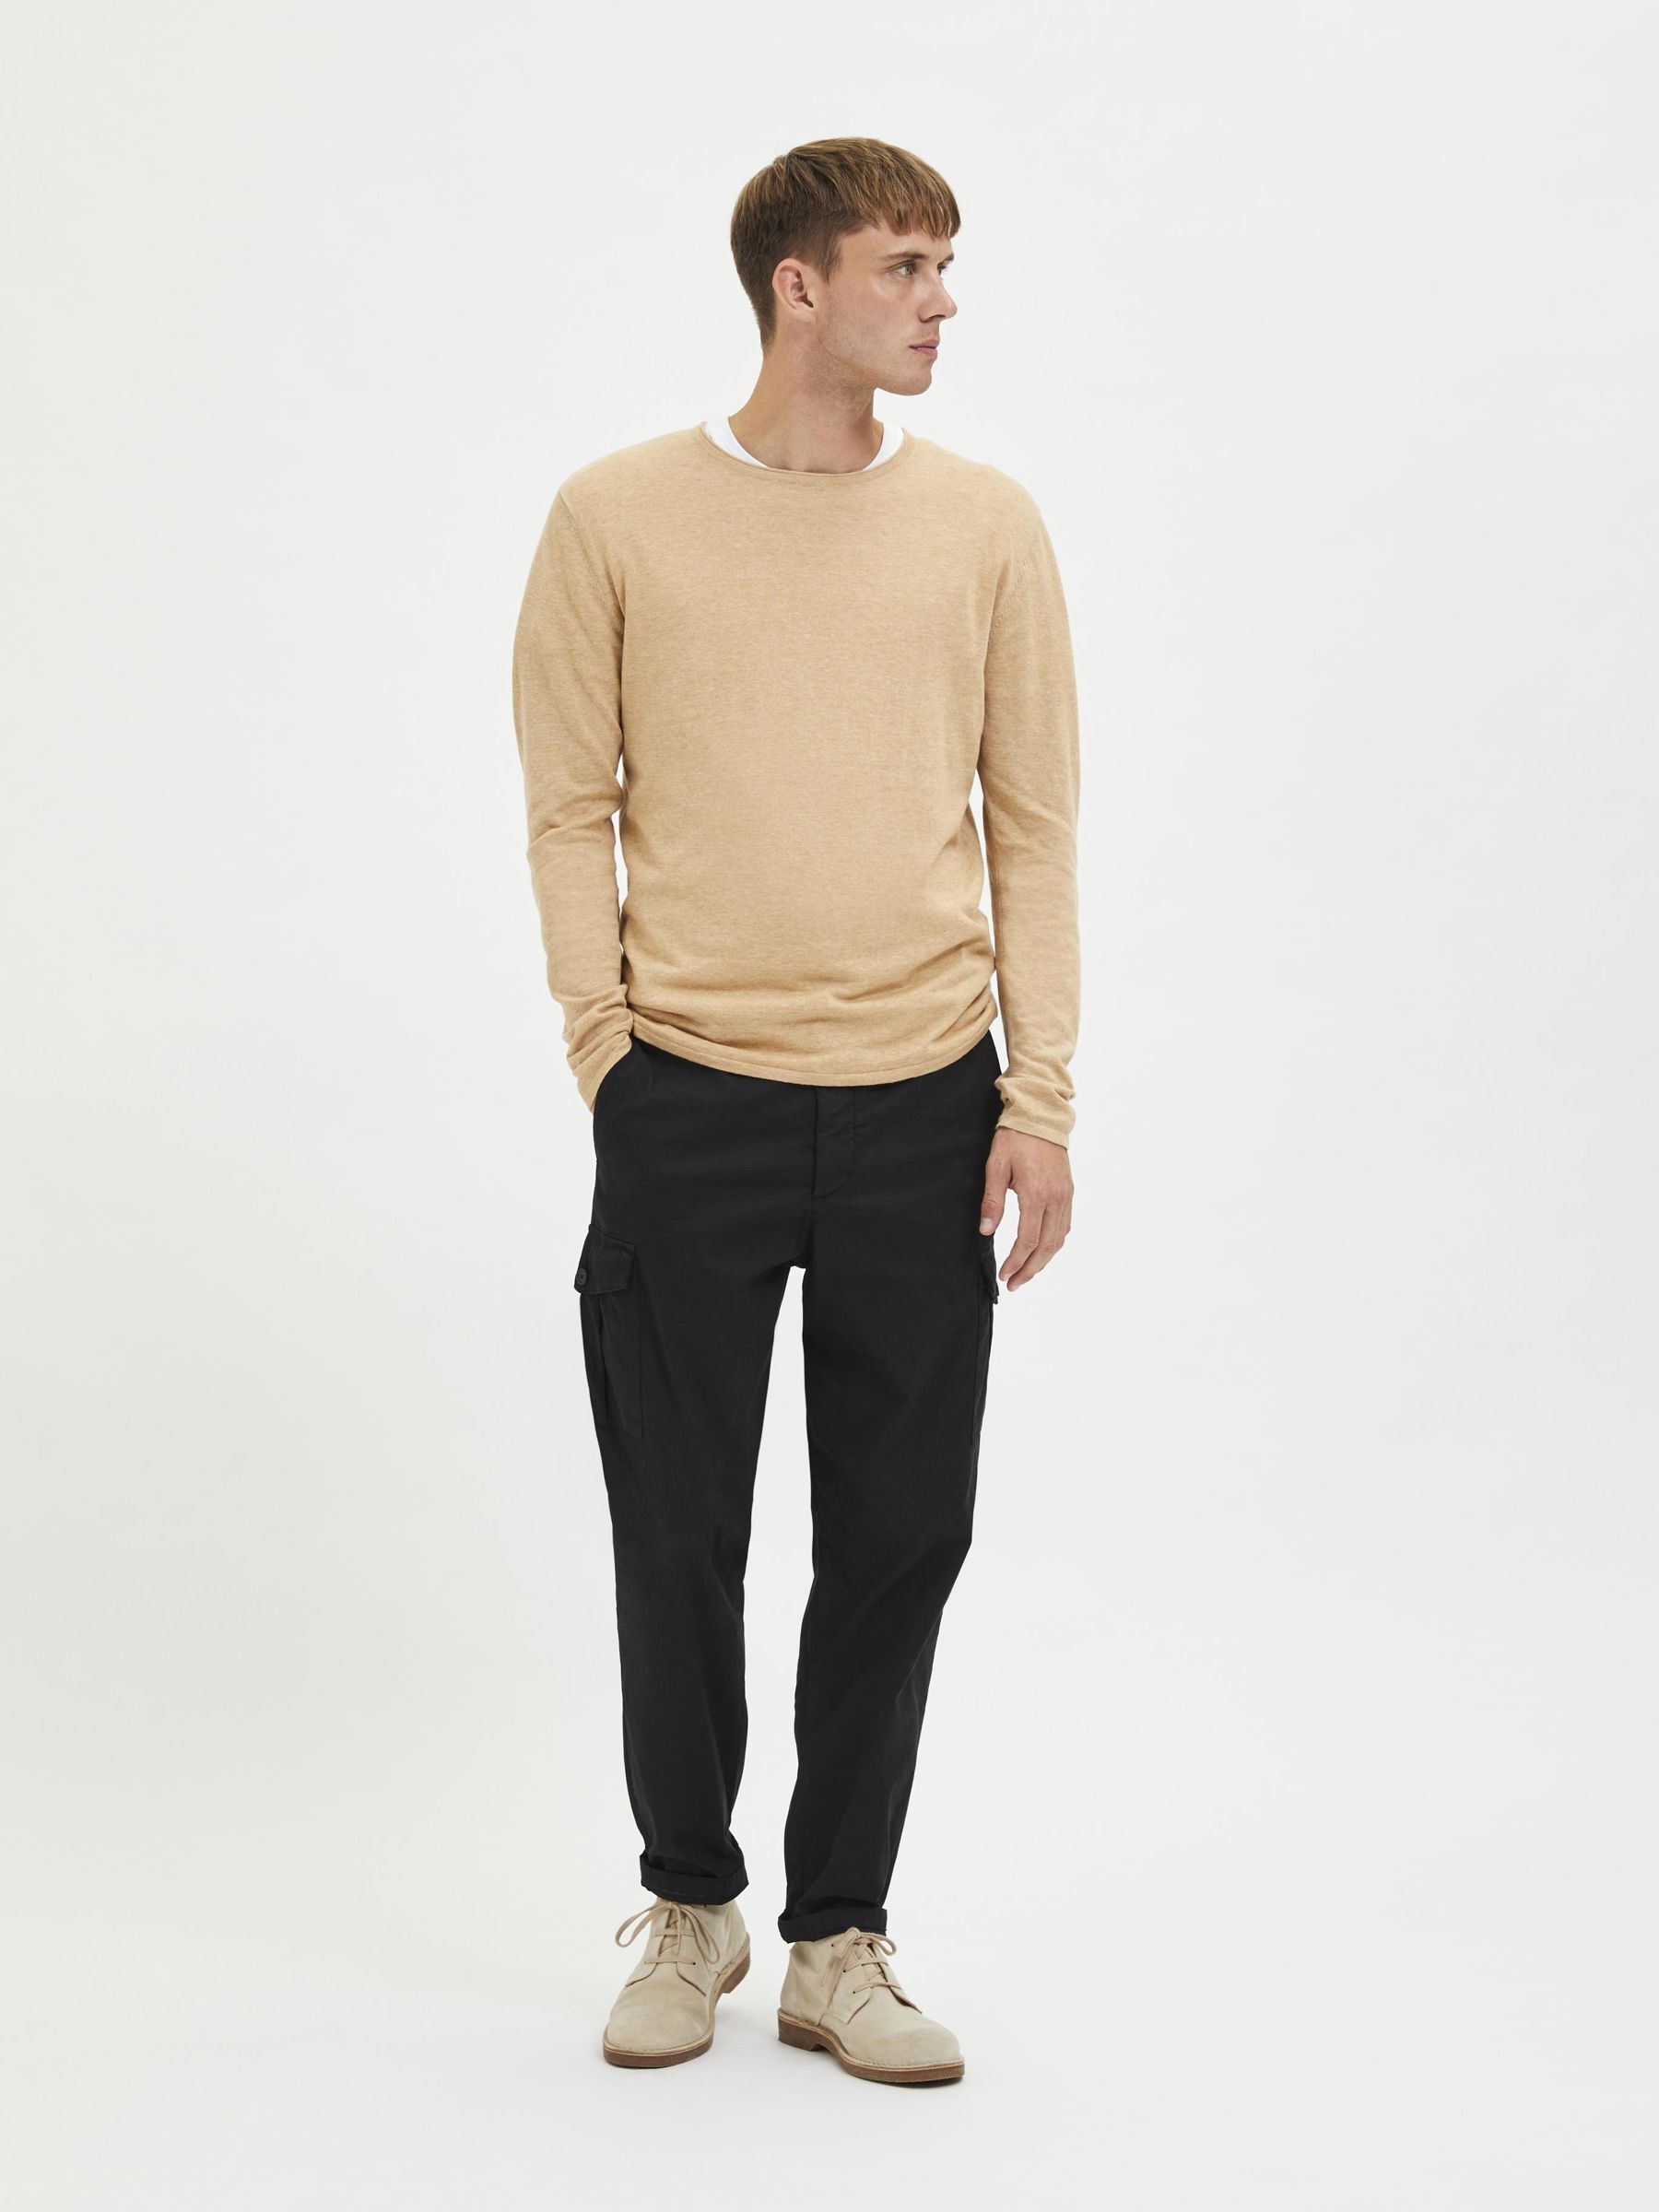 Selected SLHROME LS KNIT CREW NECK B NOOS bruin/beige-3 4